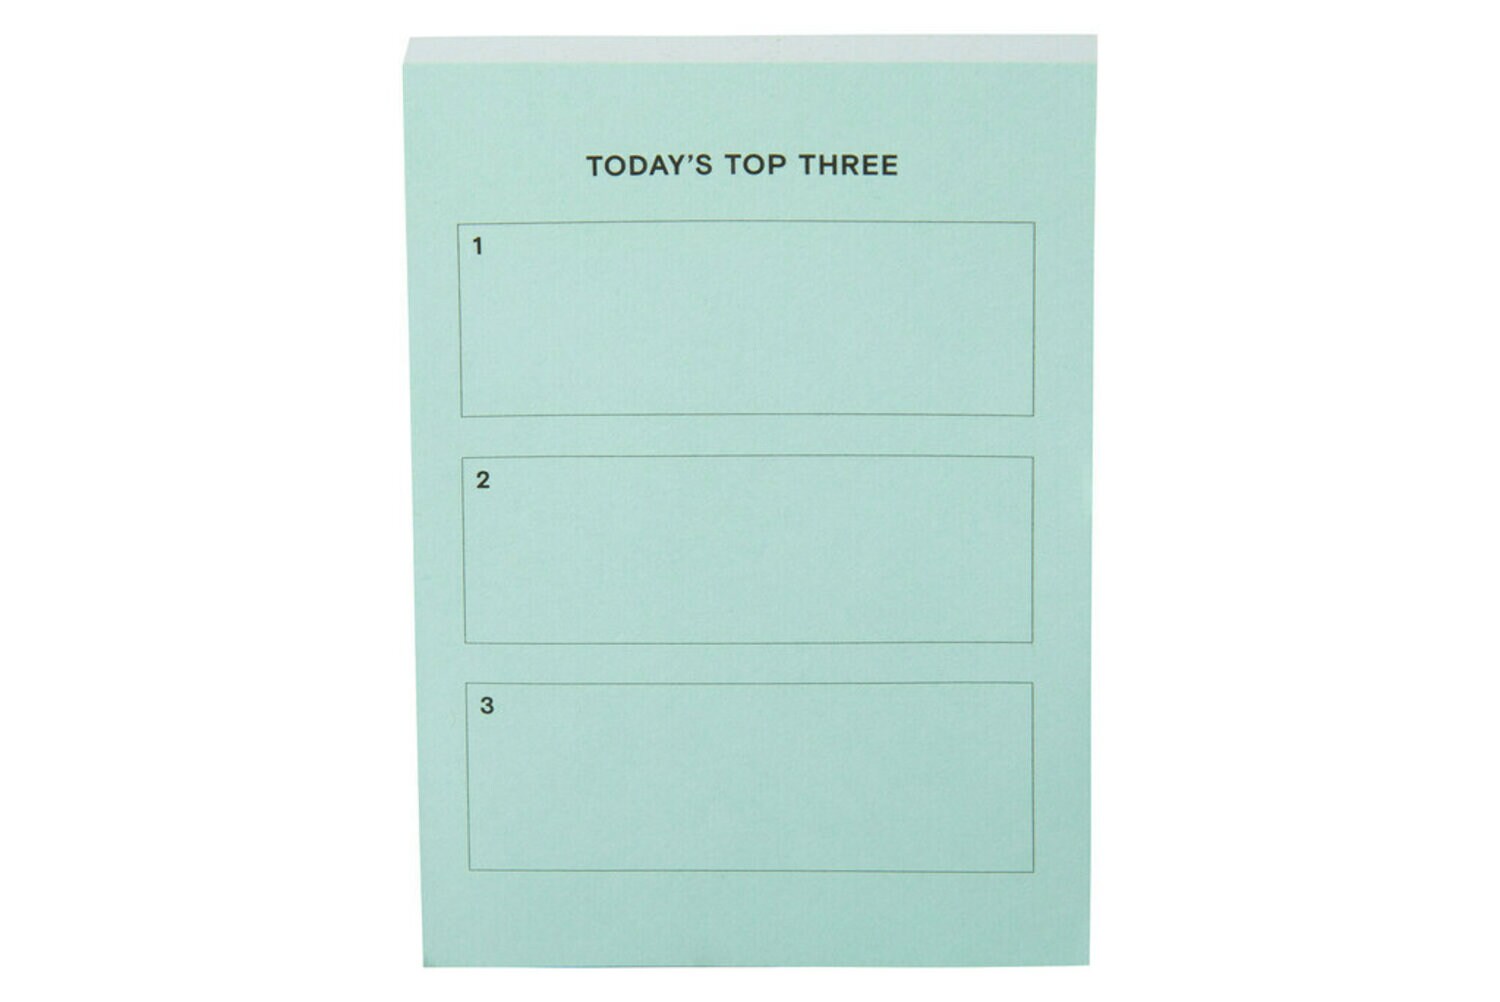 7100234682 - Post-it Printed Notes NTD-34-TQ, 2.9 in x 4 in (73 mm x 101 mm)